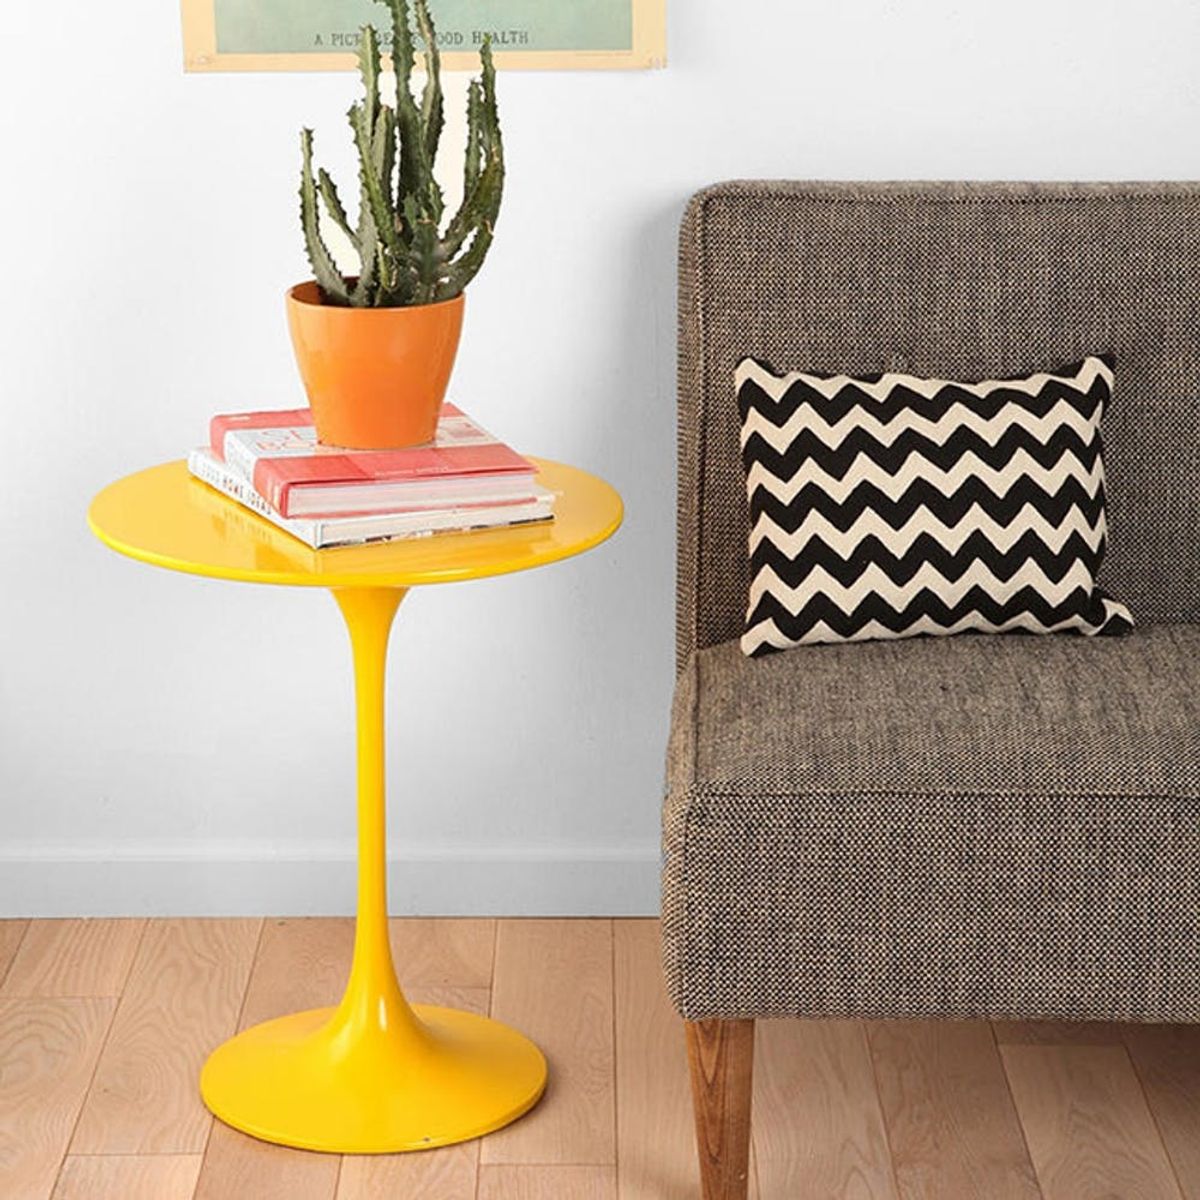 Take a Side! 15 Beautiful Side Tables